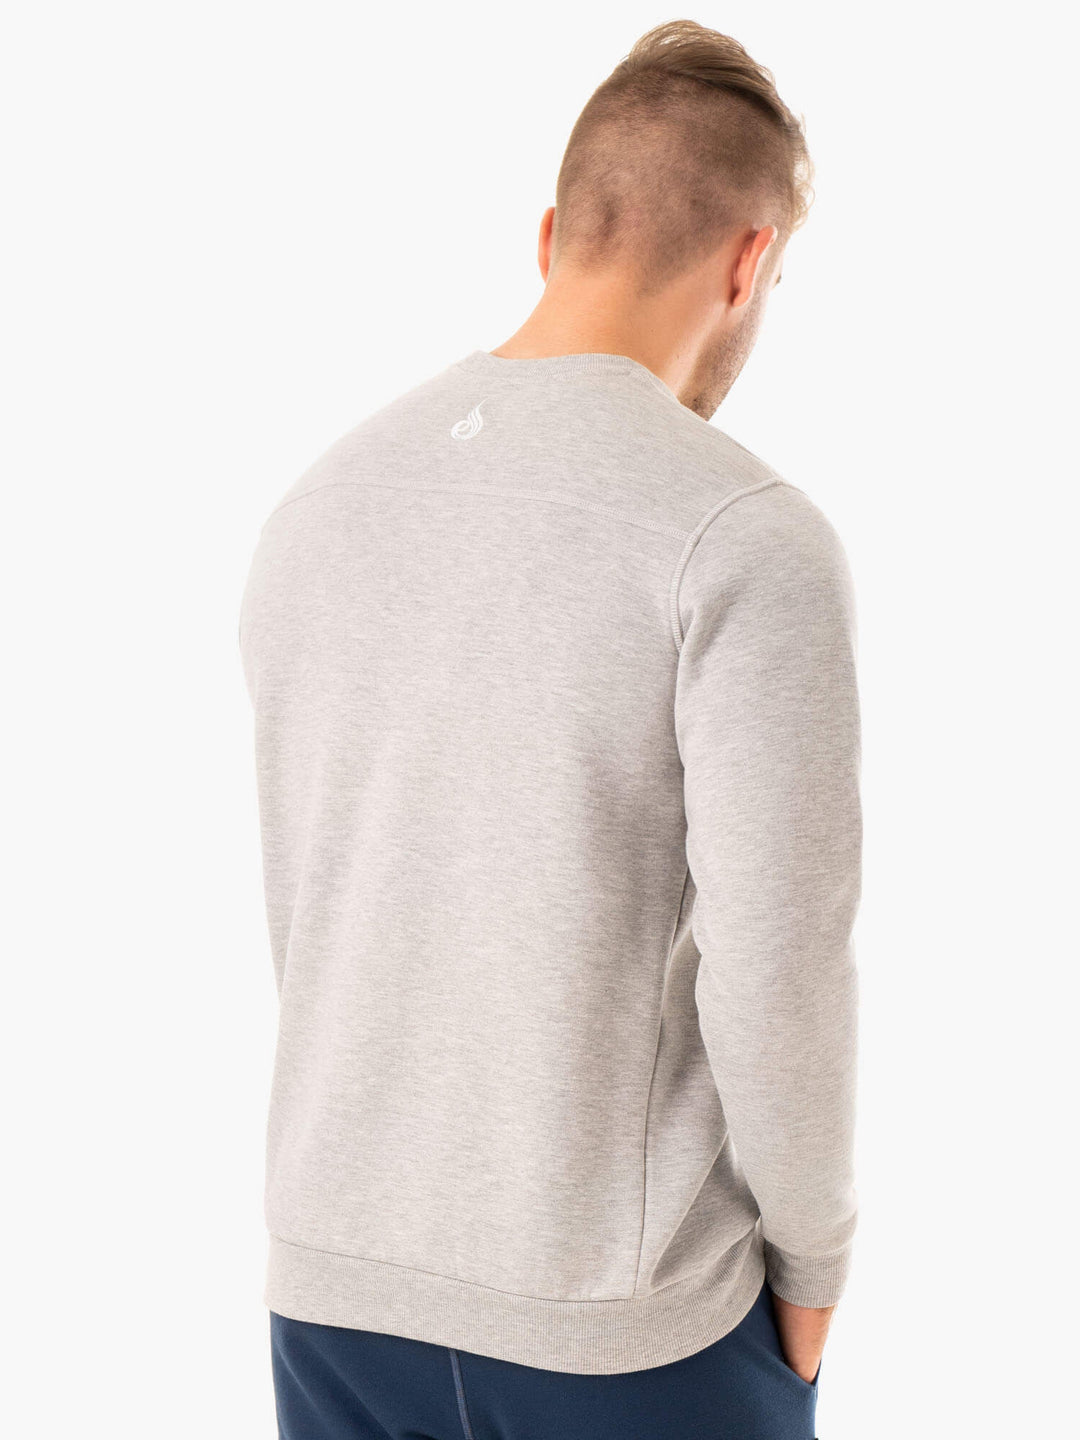 Recharge Pullover - Grey Marl Clothing Ryderwear 